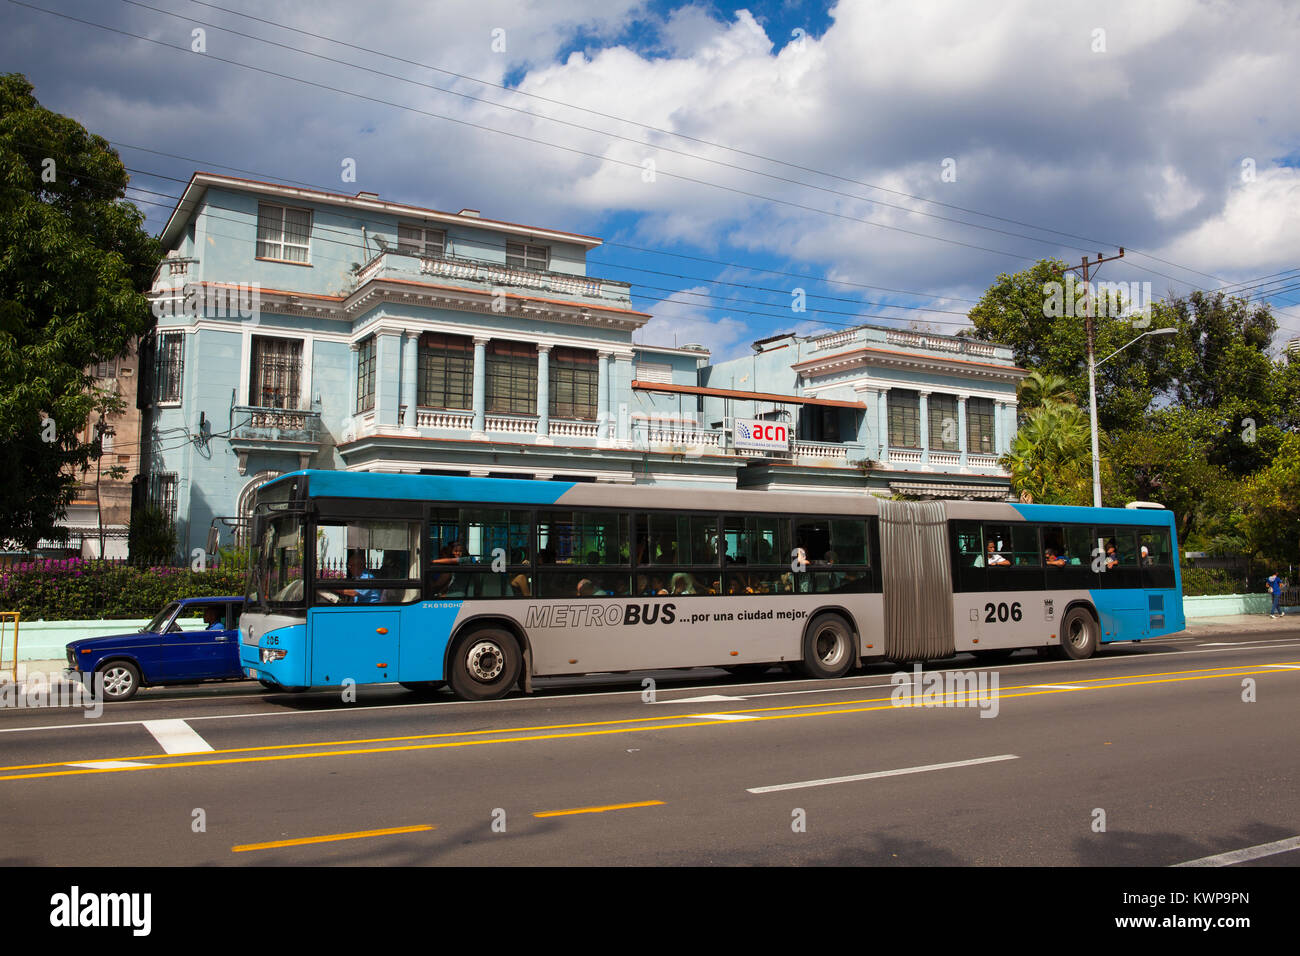 Havana, Cuba - January 21,2017: Typical public bus in front of an old colonial building on the Havana street. Cuba Stock Photo